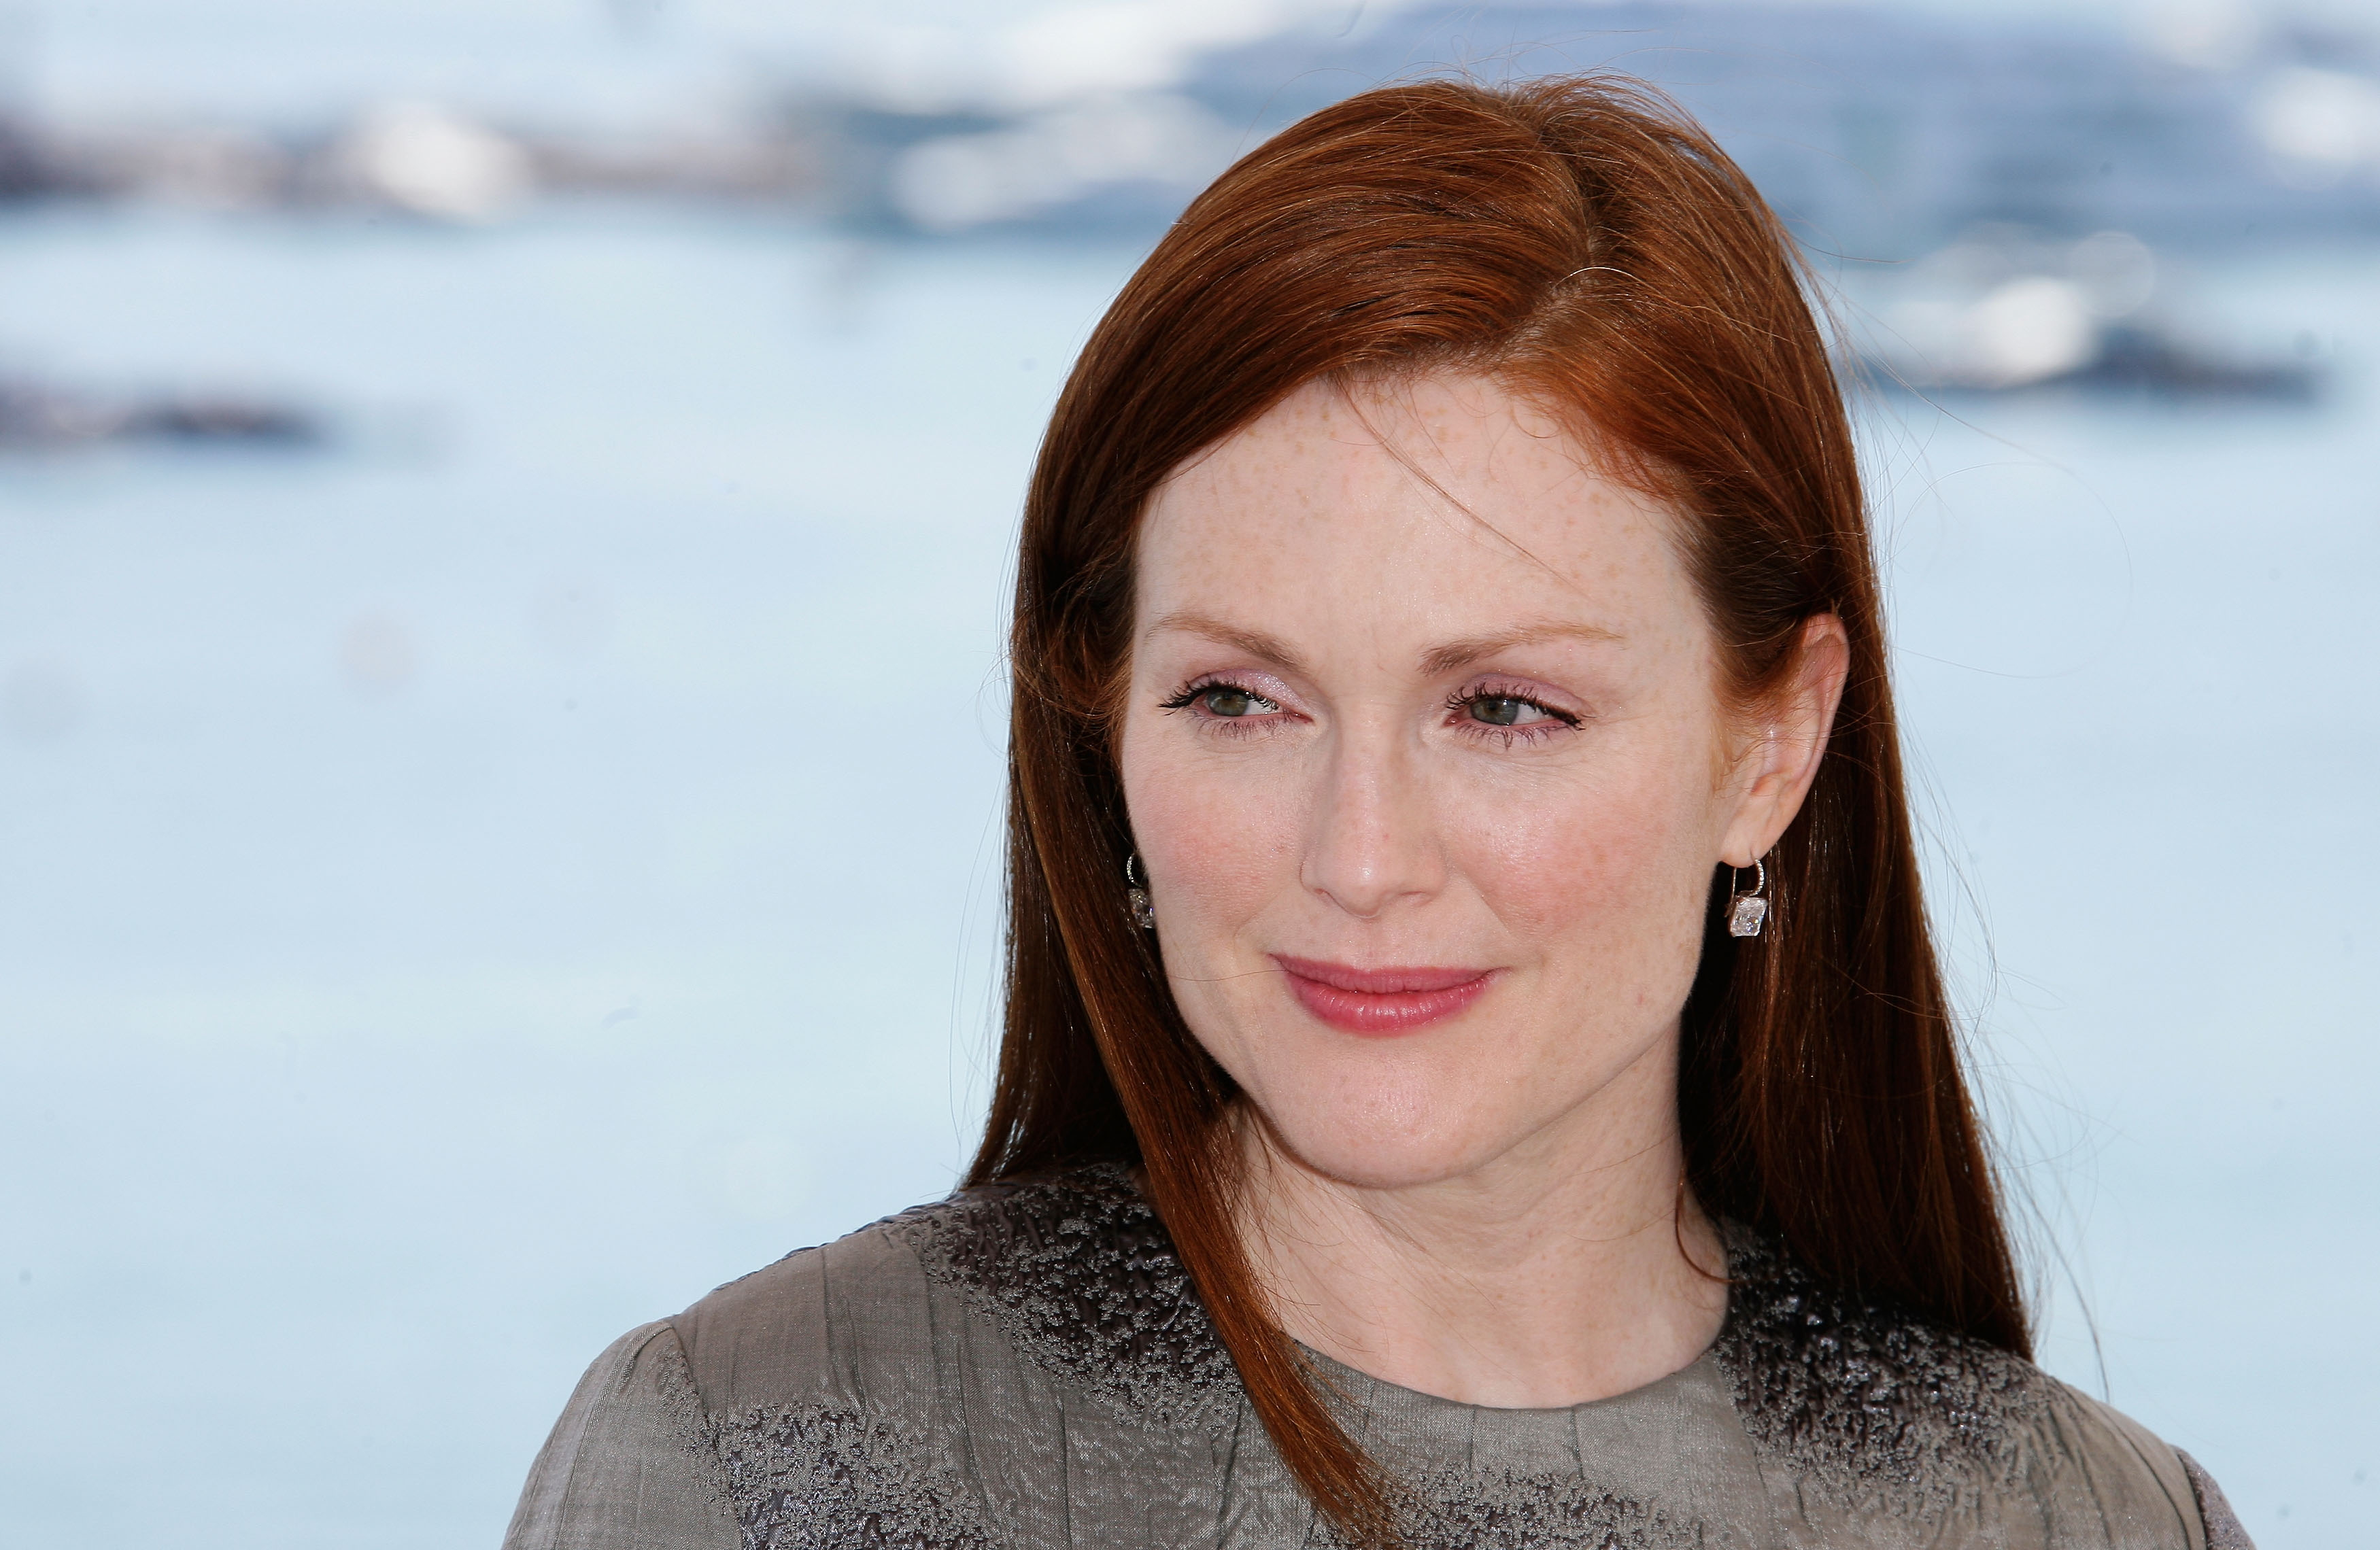 Julianne Moore during the 60th International Cannes Film Festival on May 18, 2007 in Cannes, France | Sources: Getty Images